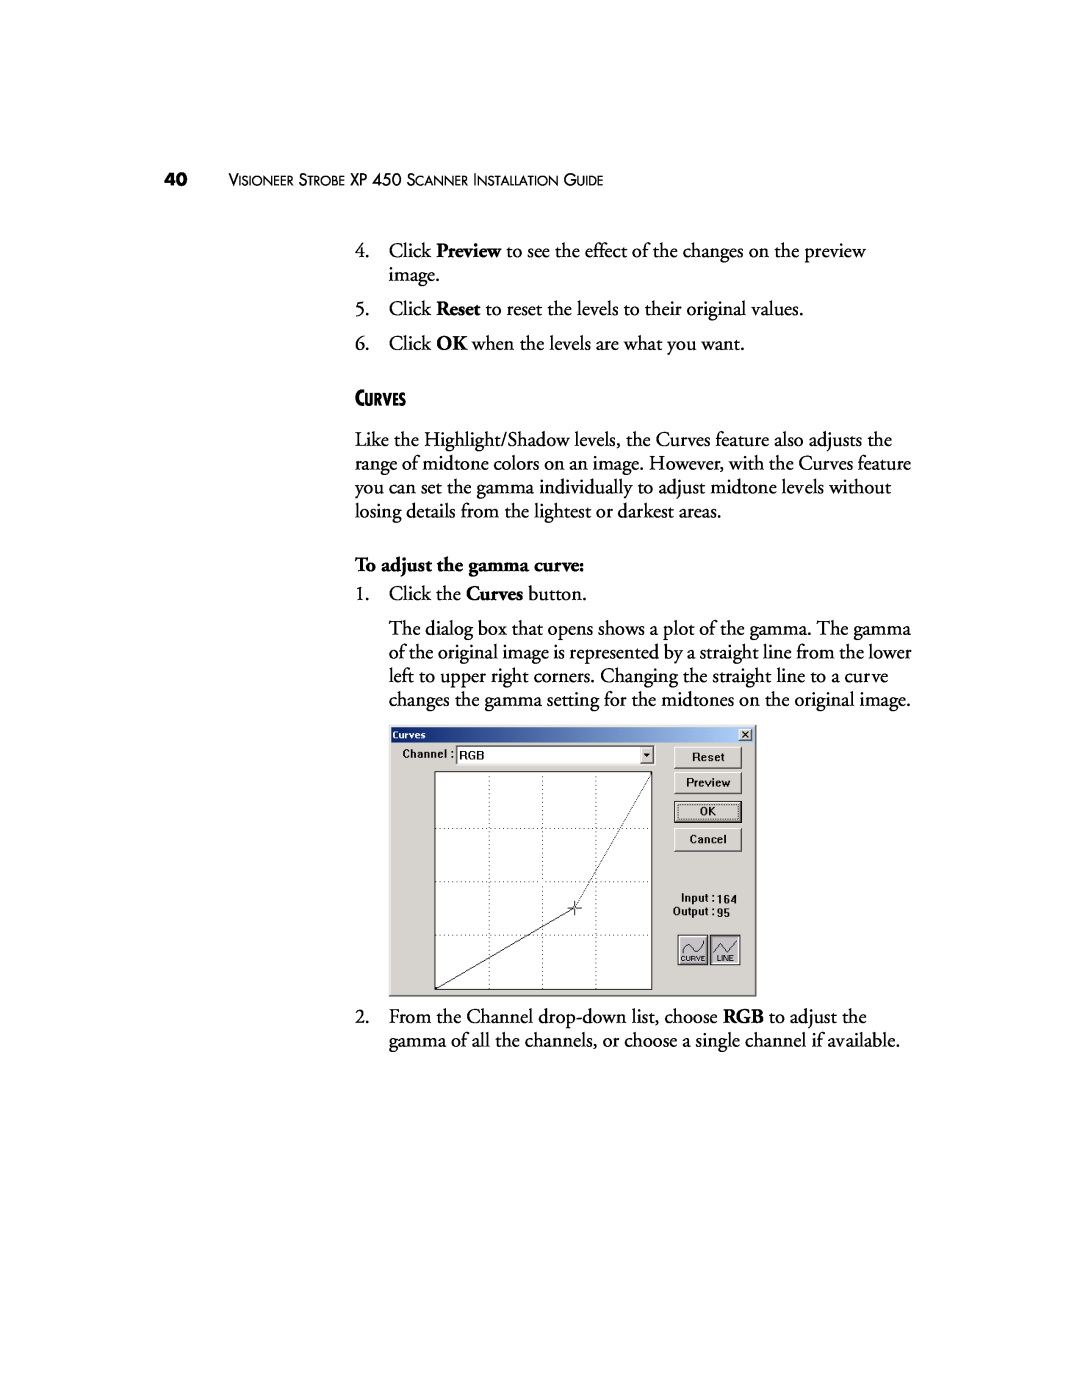 Visioneer XP 450 manual To adjust the gamma curve 